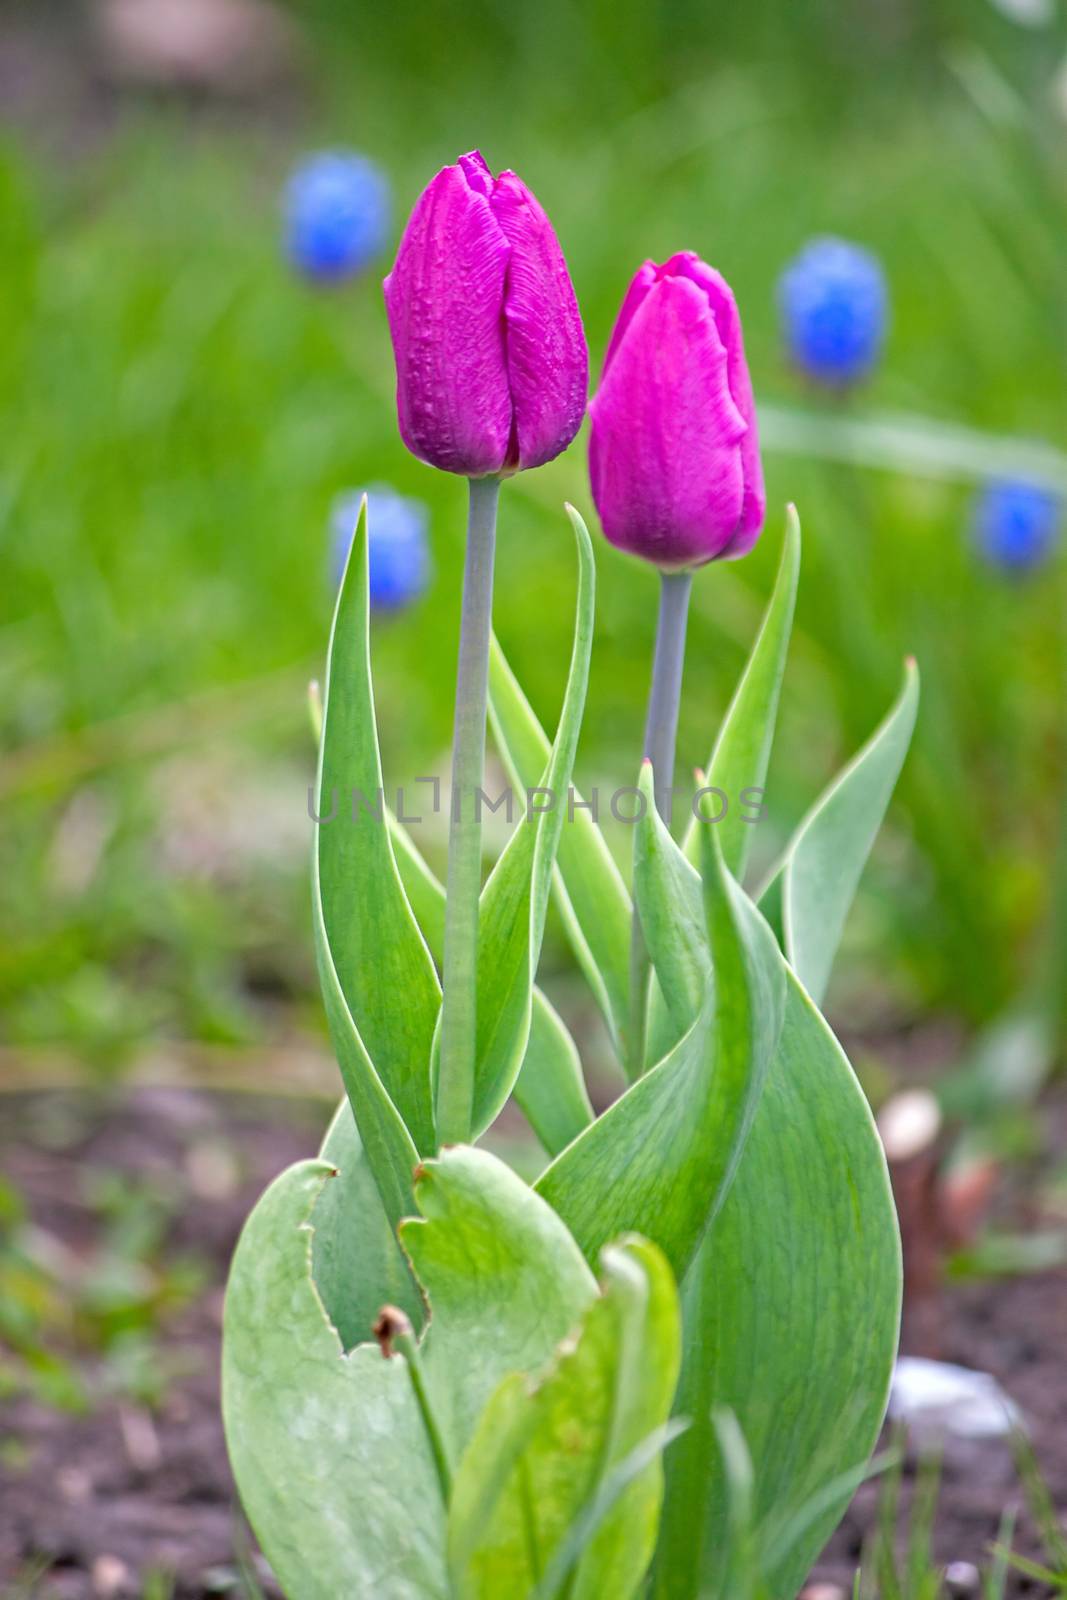 Two flowers of a tulip closeup. Image with shallow depth of field.